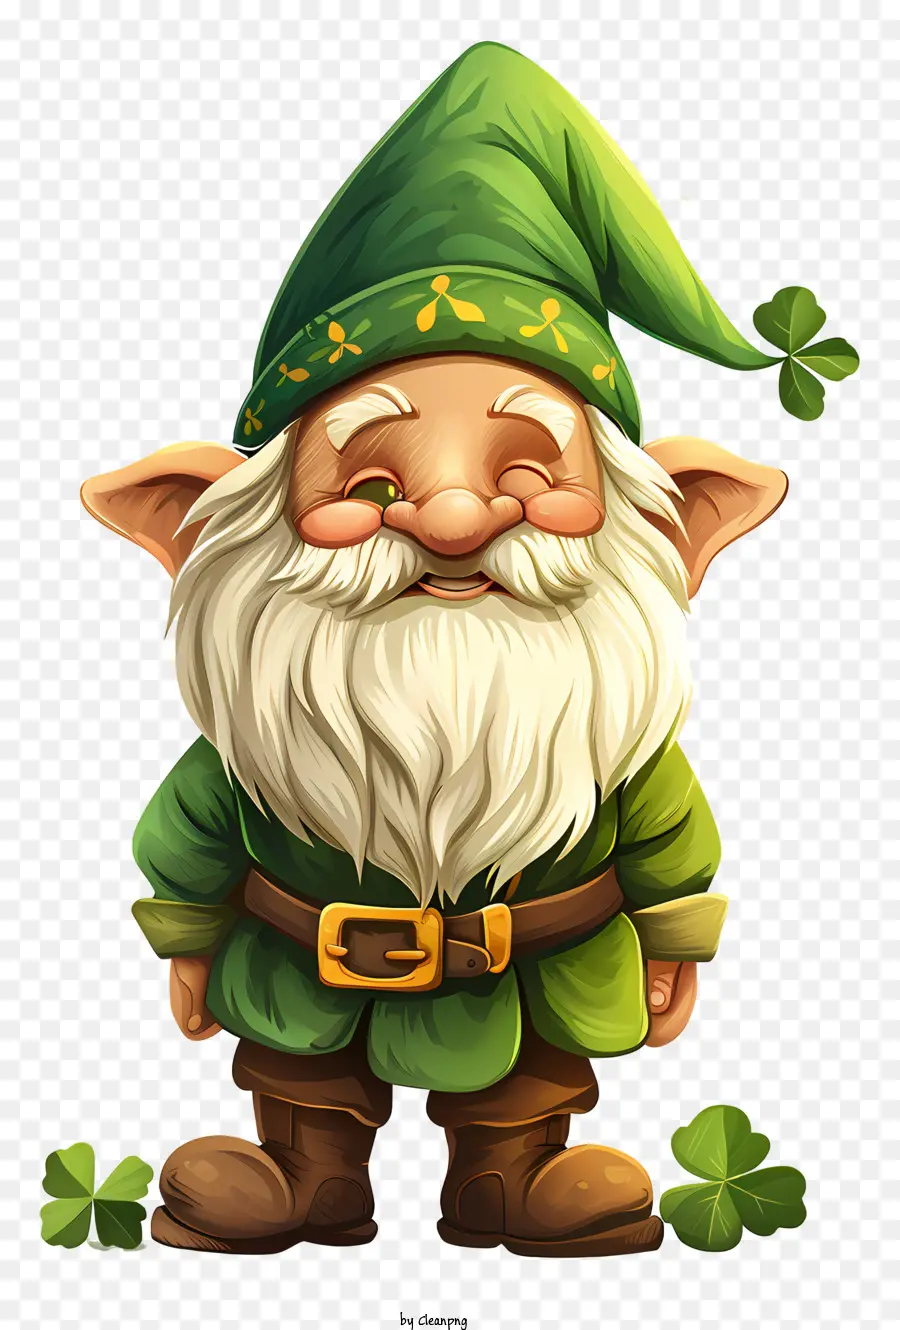 st patric's day gnome cartoon character green outfit beard hat